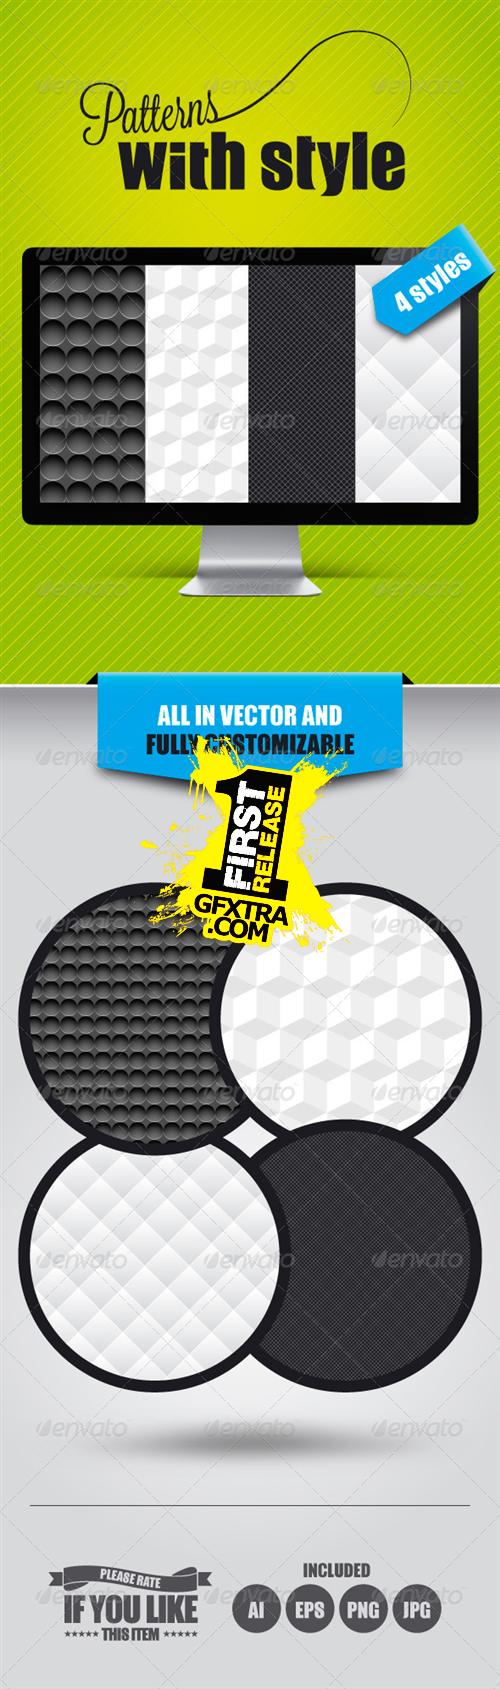 GraphicRiver - 4 Patterns With Style